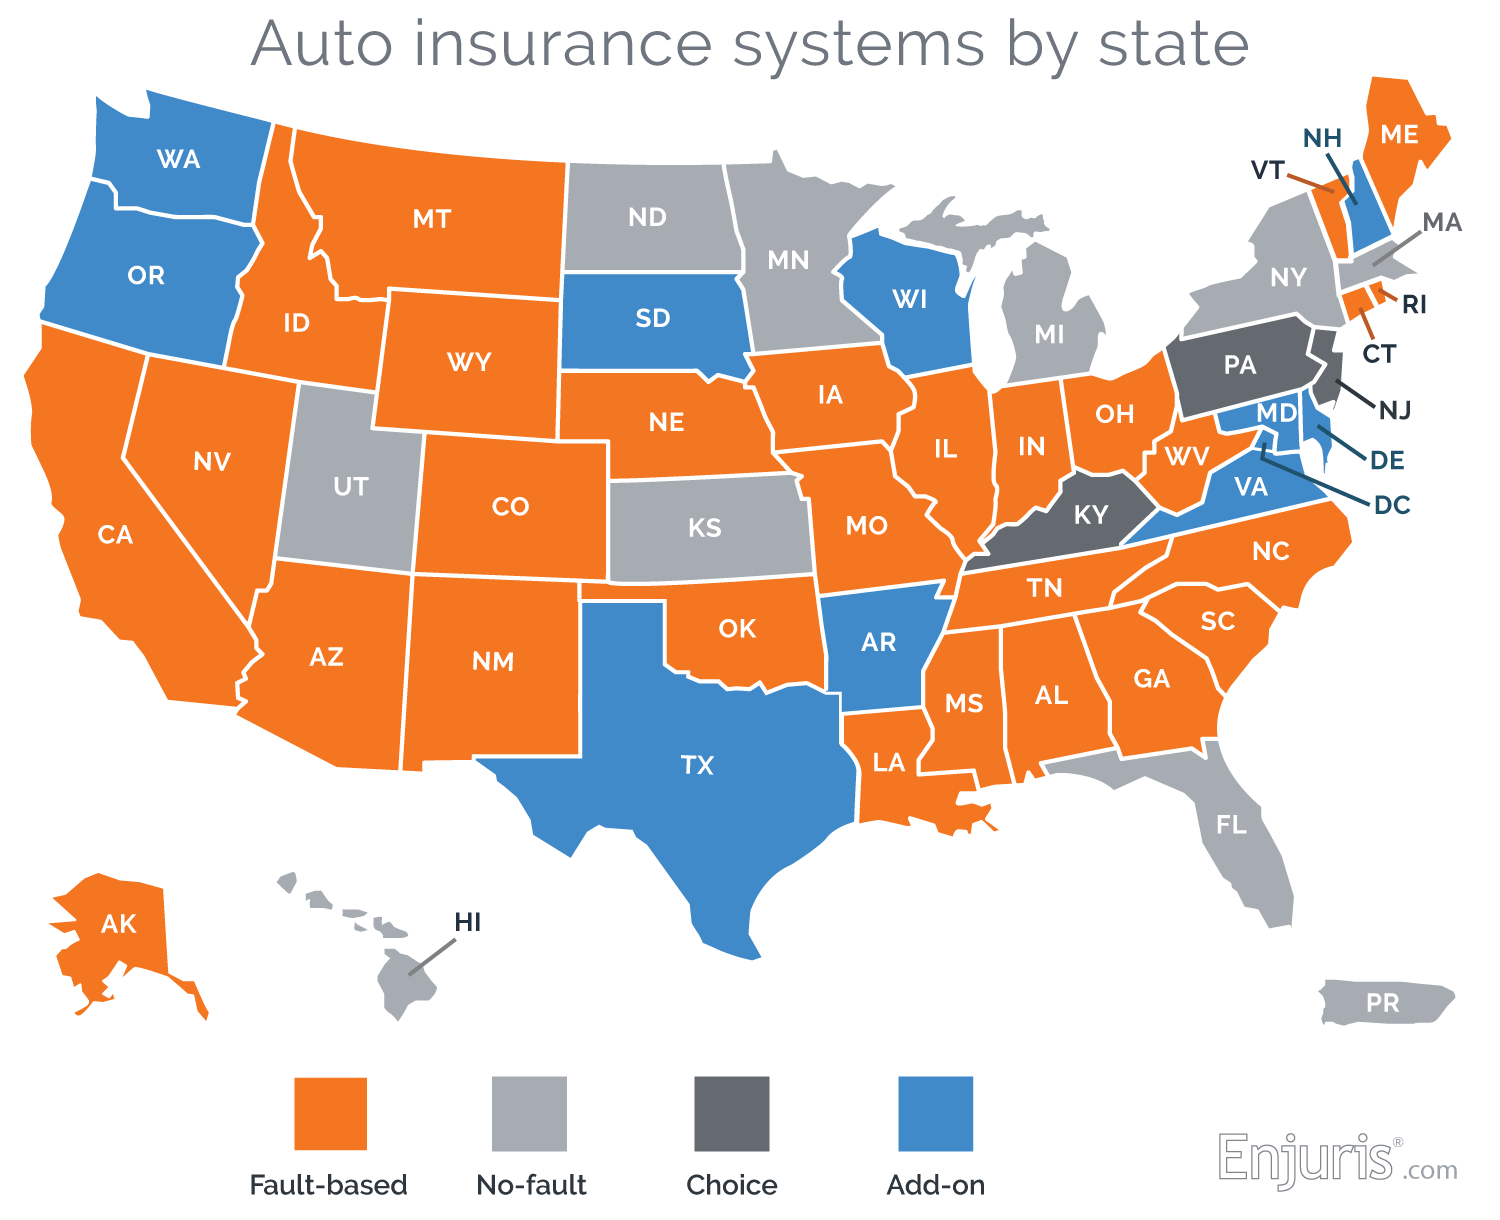 Auto insurance systems by state